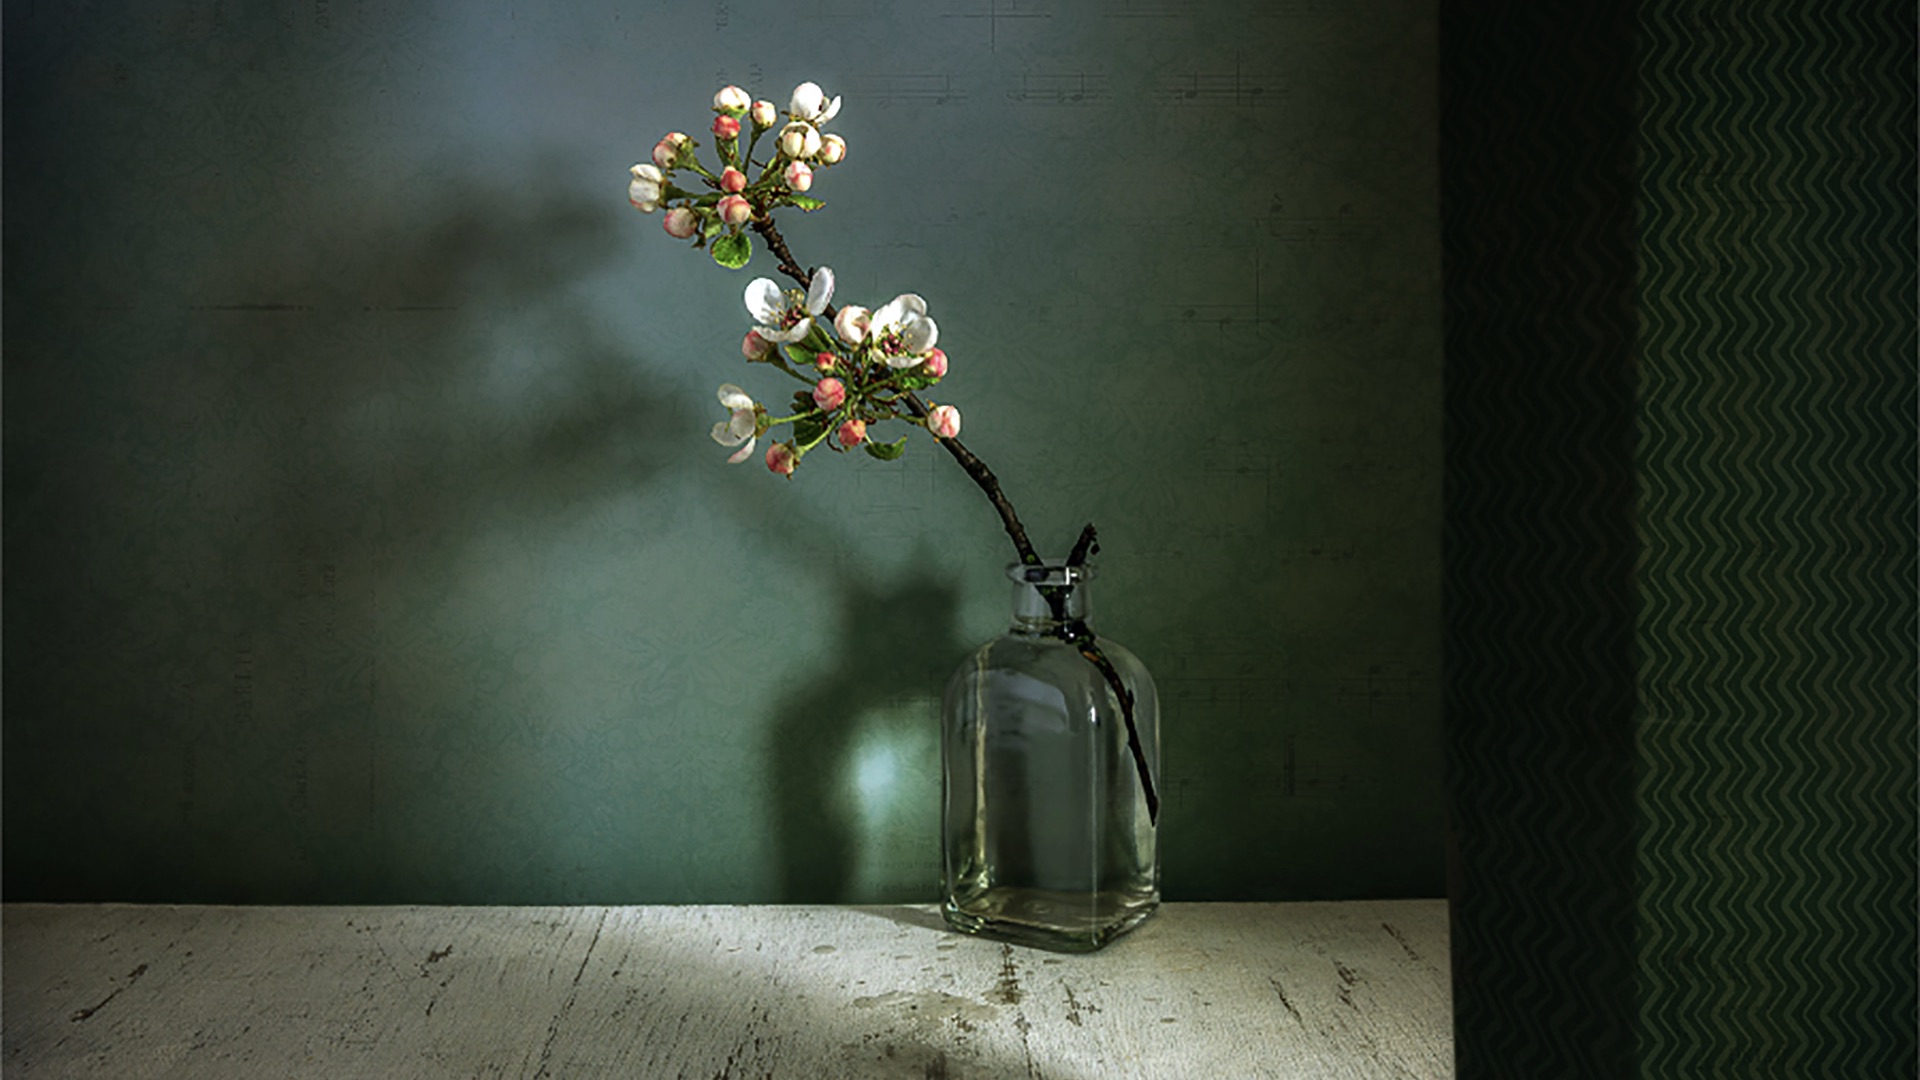 Still life photography: The essential guide for photographers